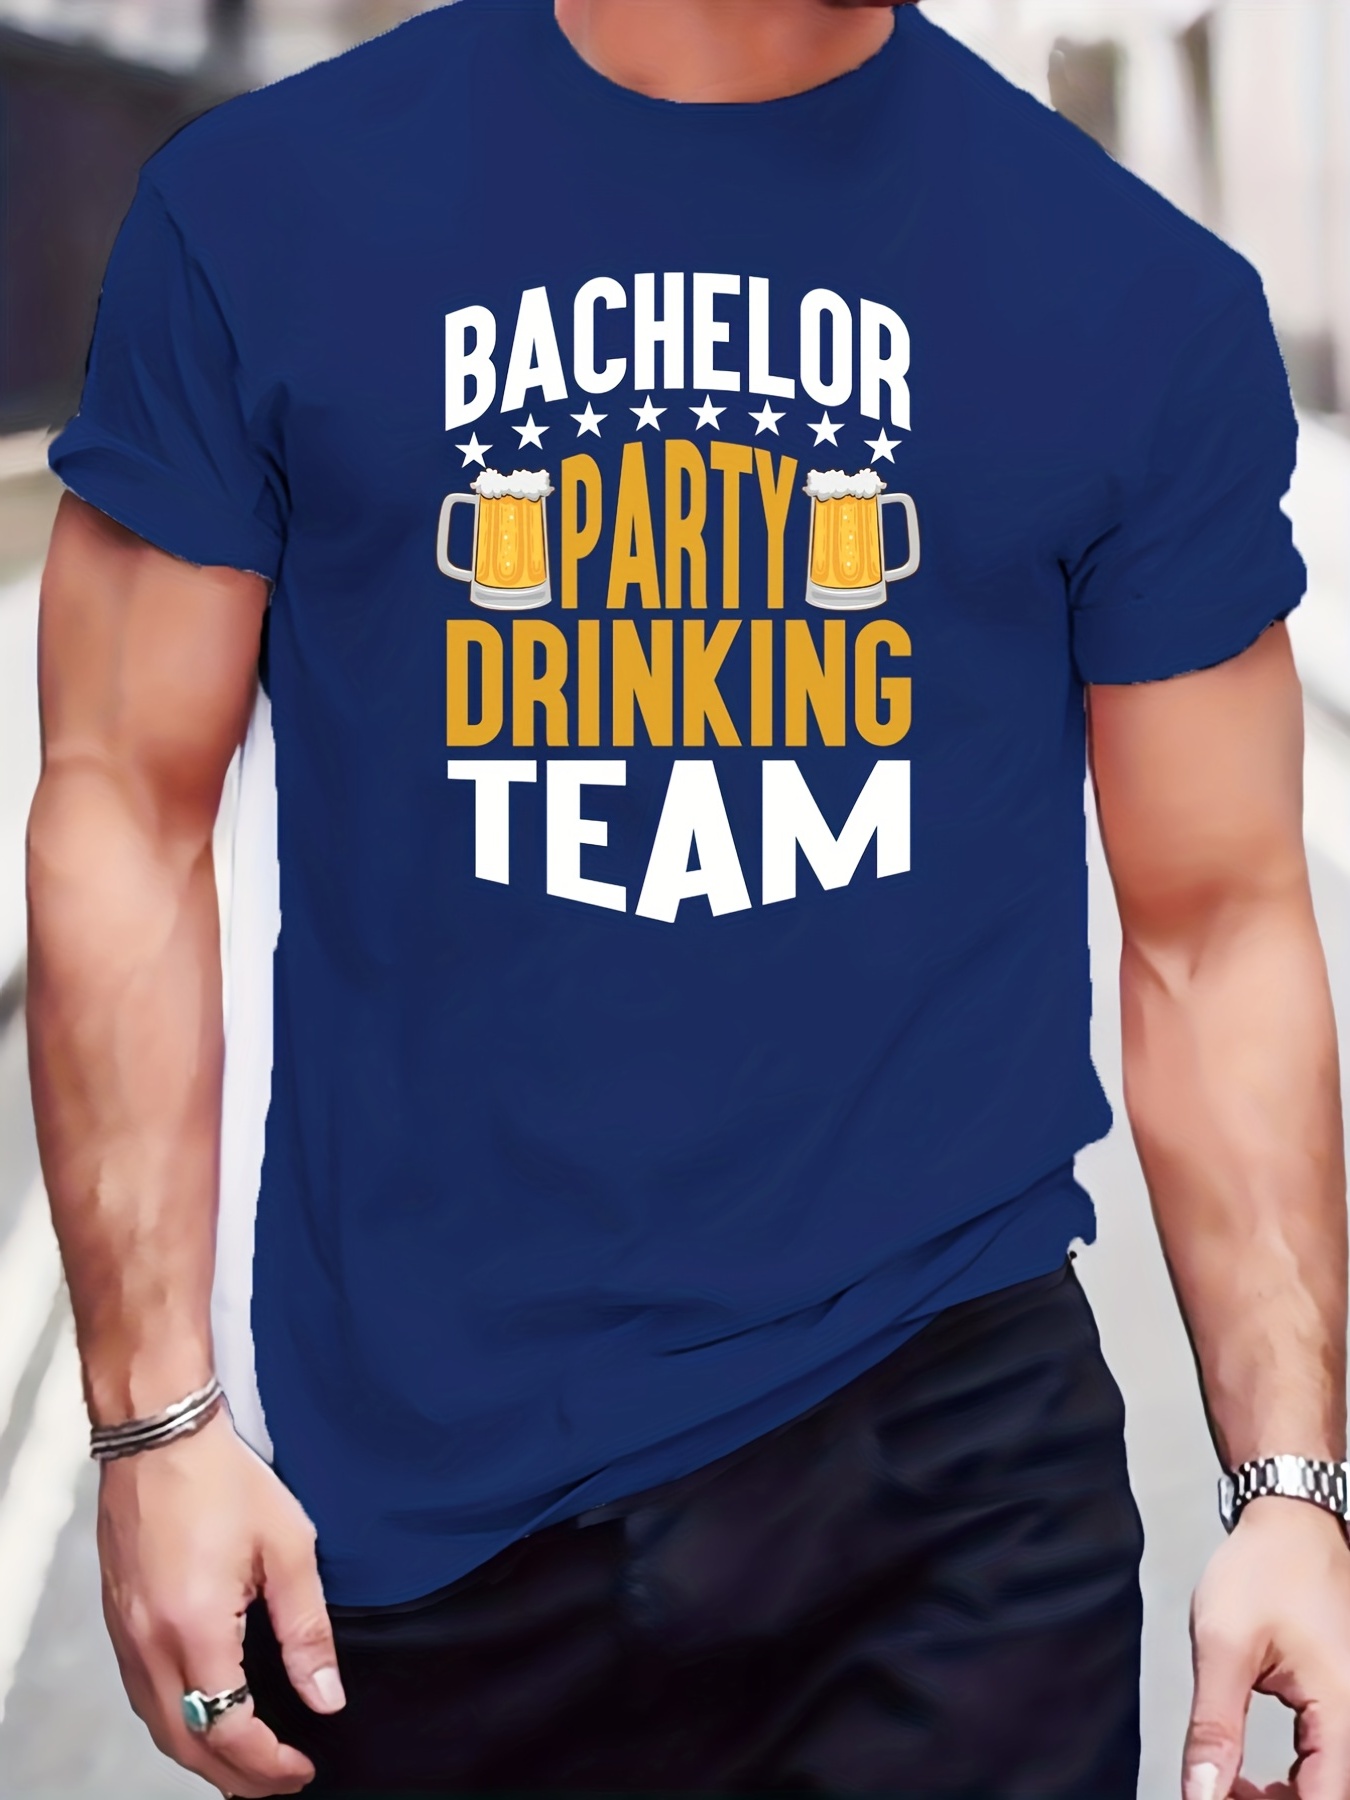 Bachelor Party Can Coolie - Pack of 10 Can Coolers with Gold Text Bachelor Party - Rock On! | Bachelor Party Favors for Men Team Groom Cup Bachelor